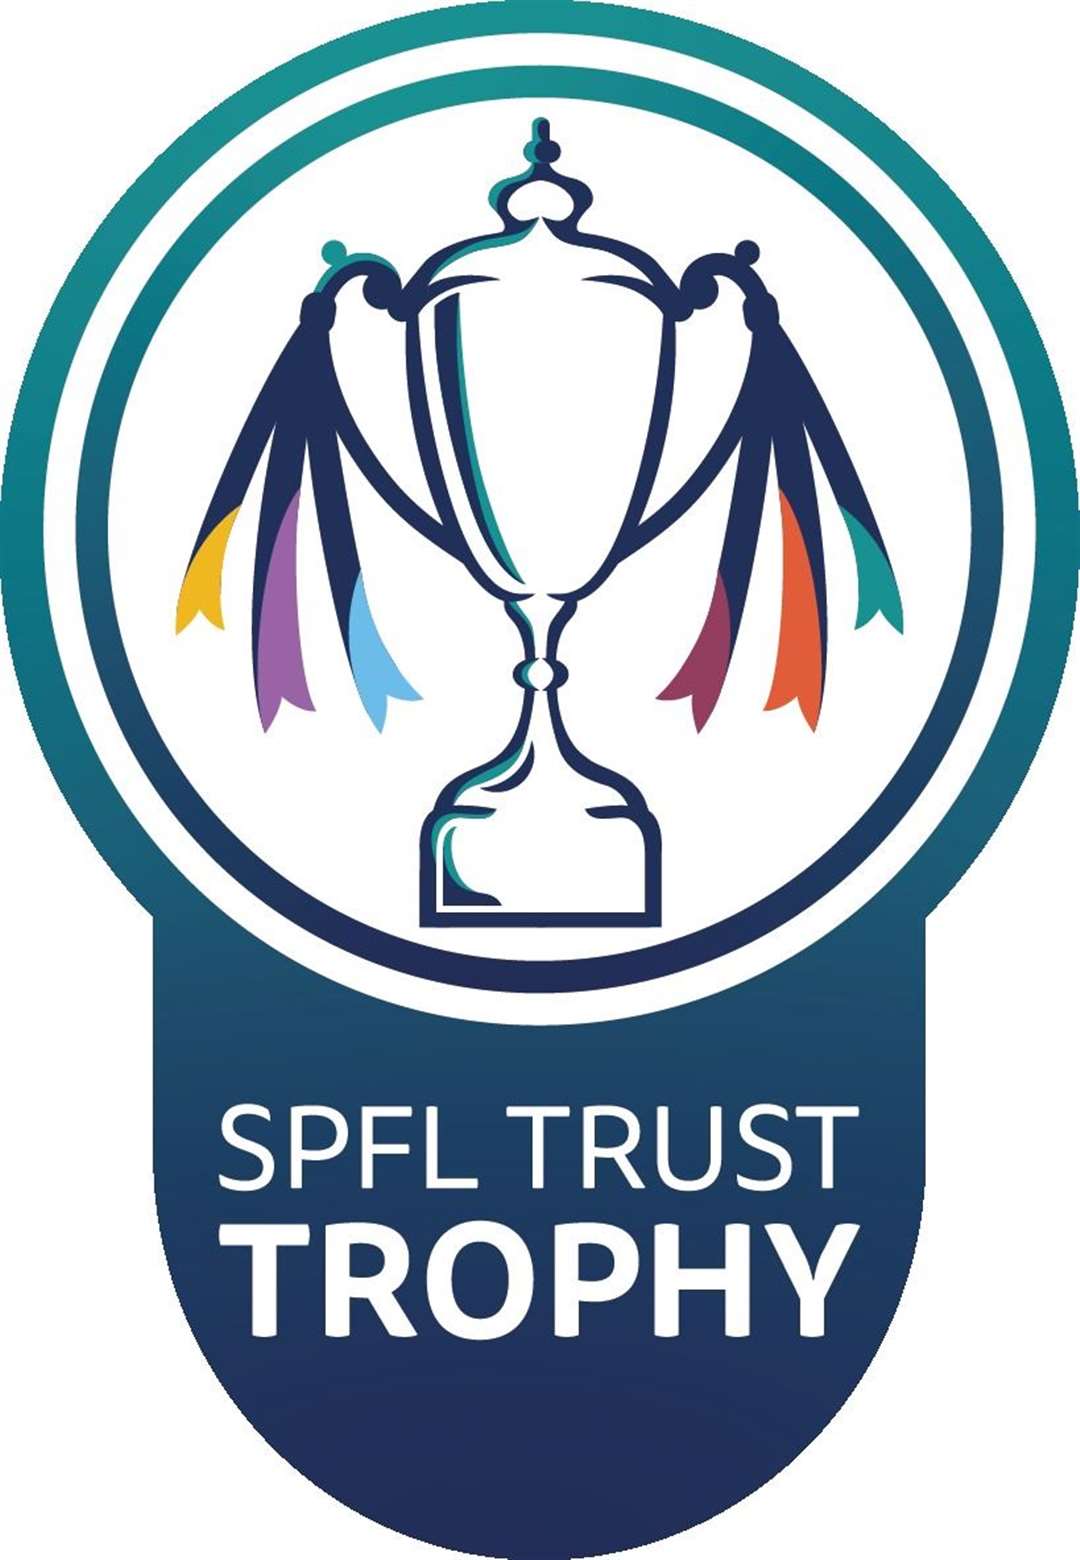 The SPFL Trust Trophy.